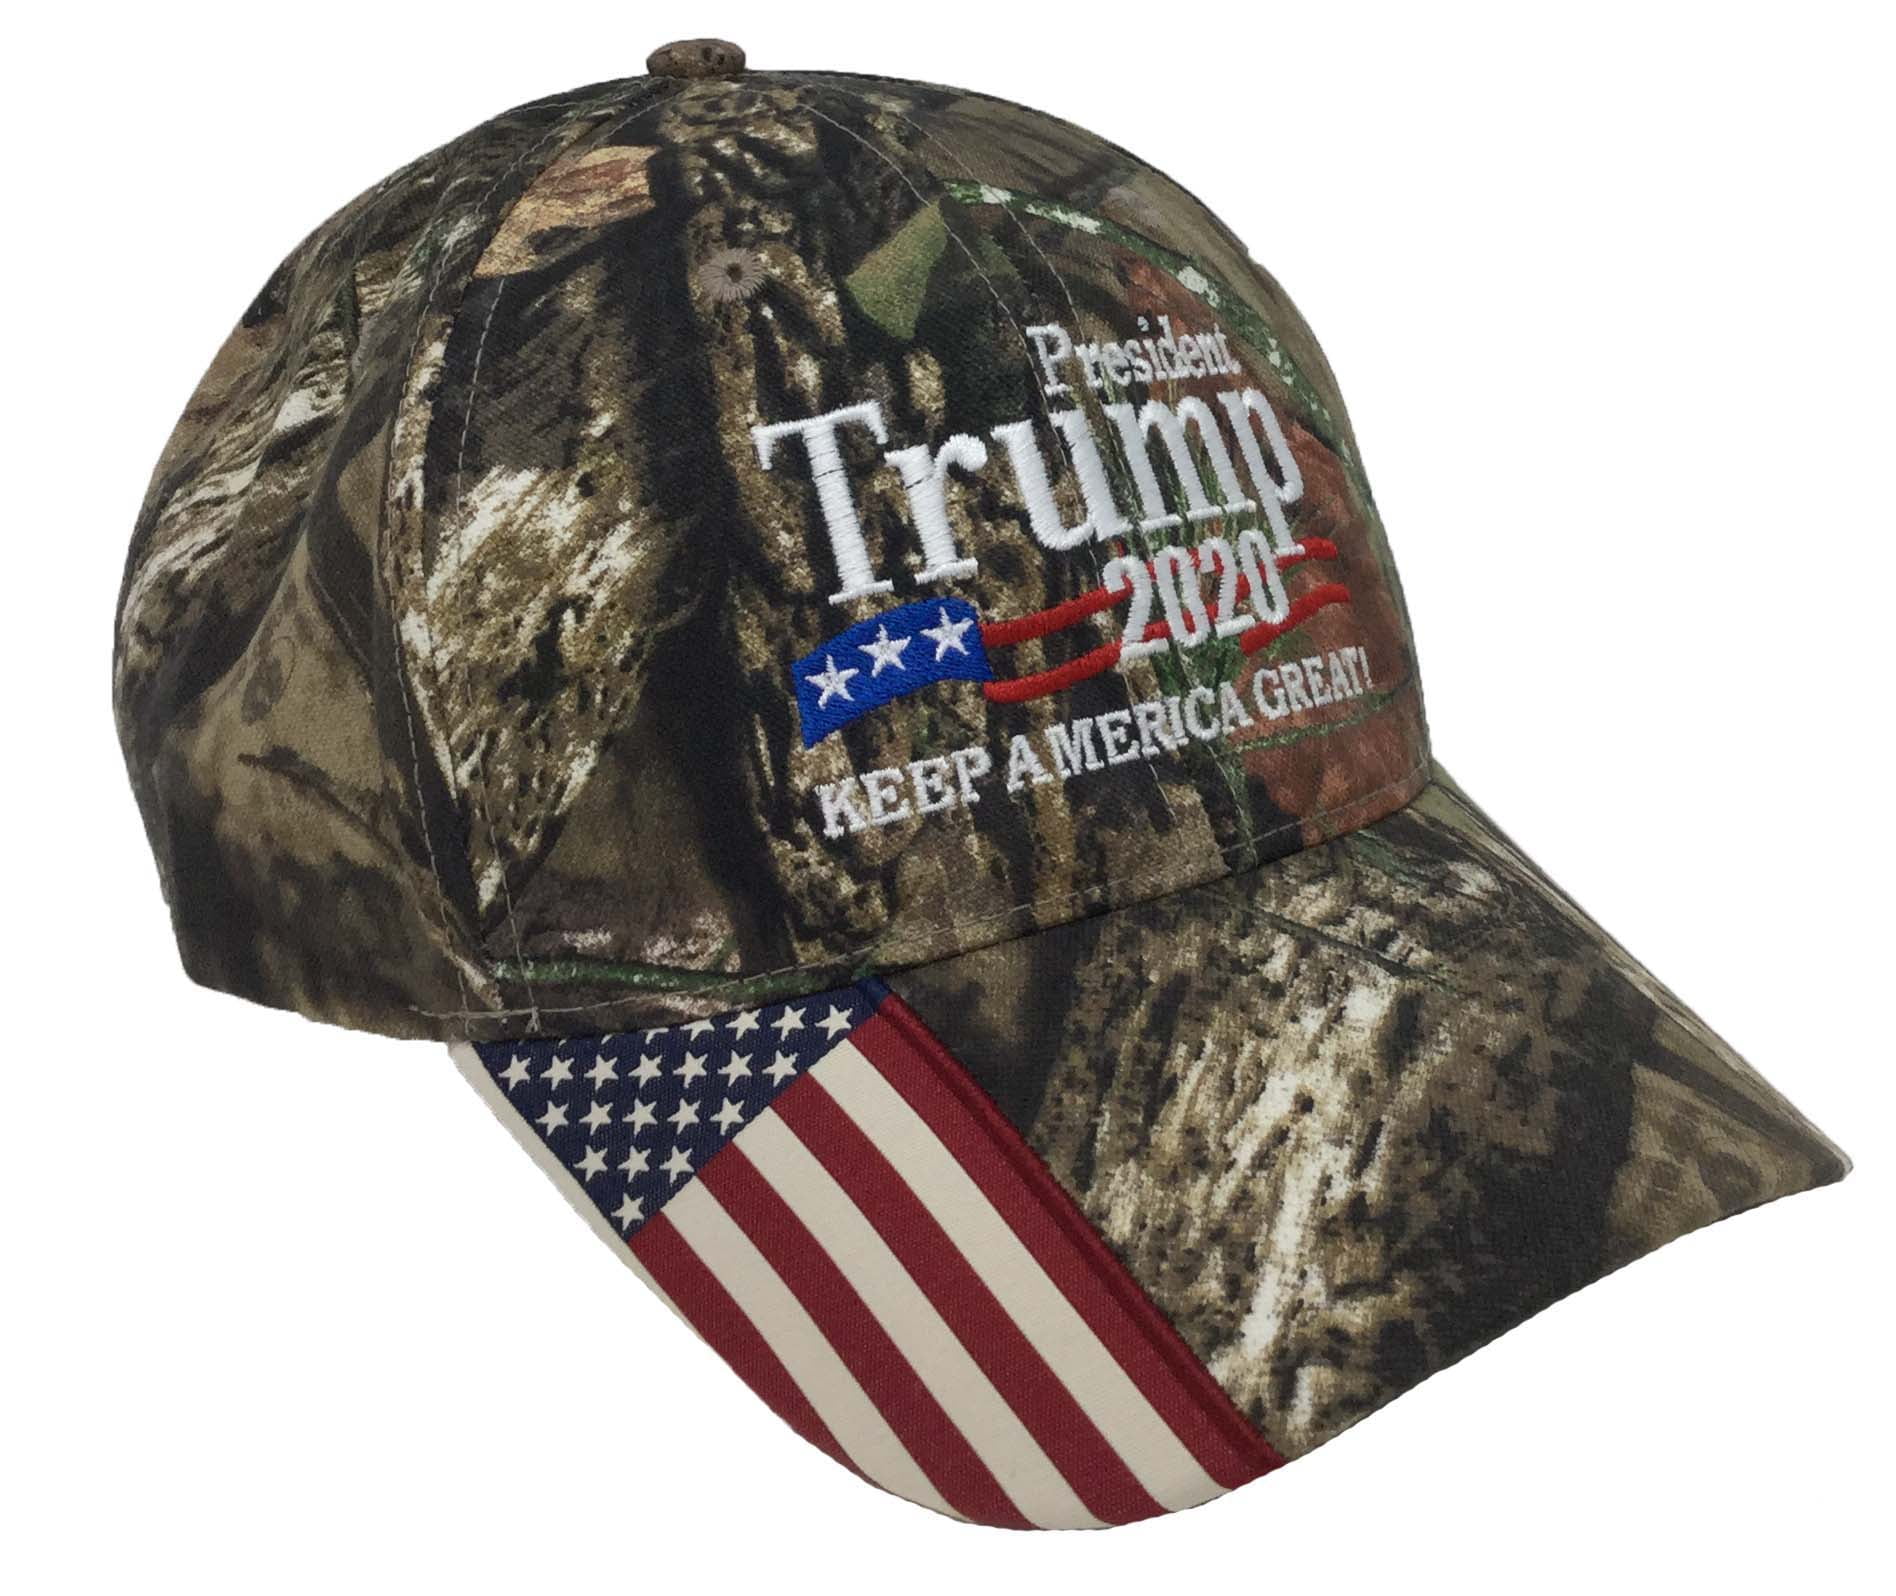 Donald Trump 2020 Hat Camo with American Flag Embroidered Mossy Oak 